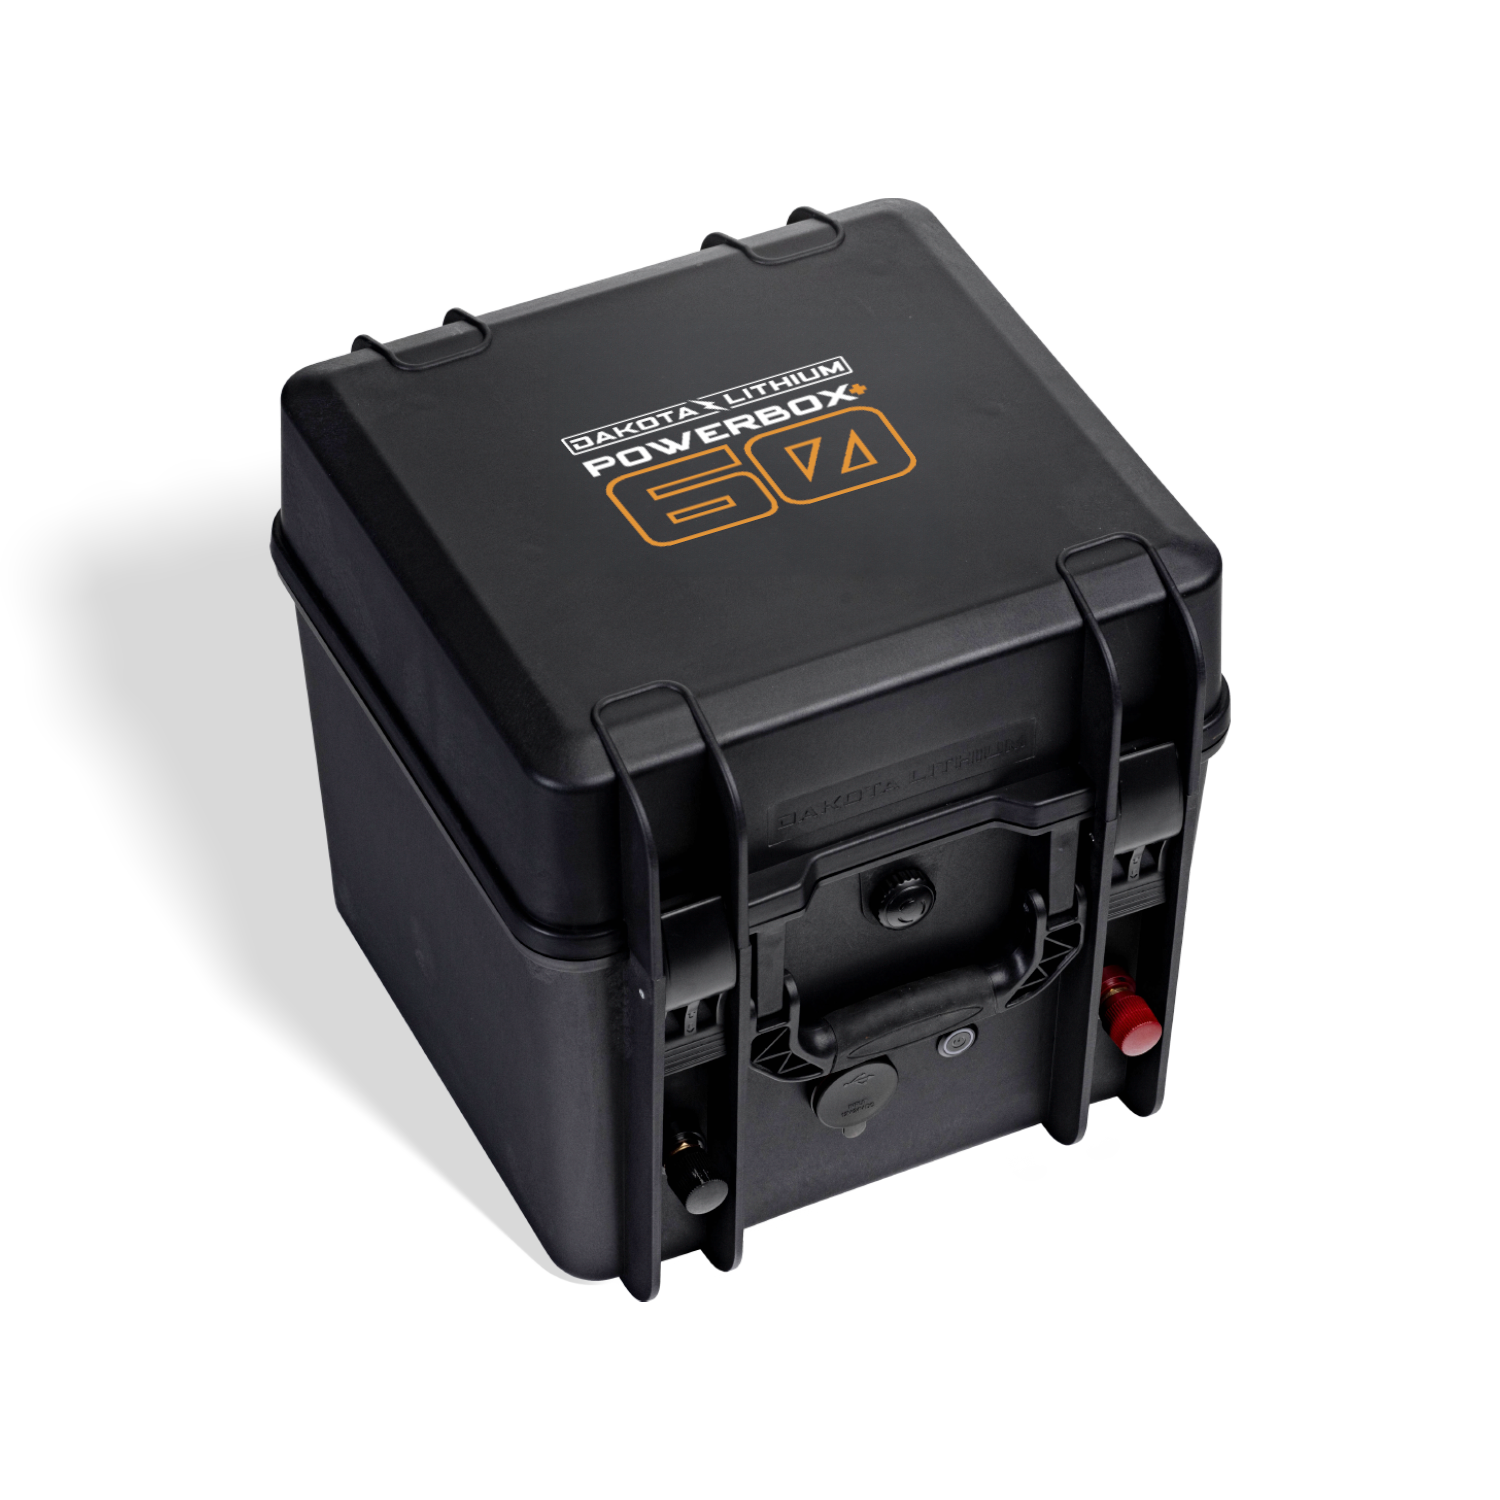 Powerbox+ 60 Waterproof Power Station, DL+ 12V 60Ah Battery Included